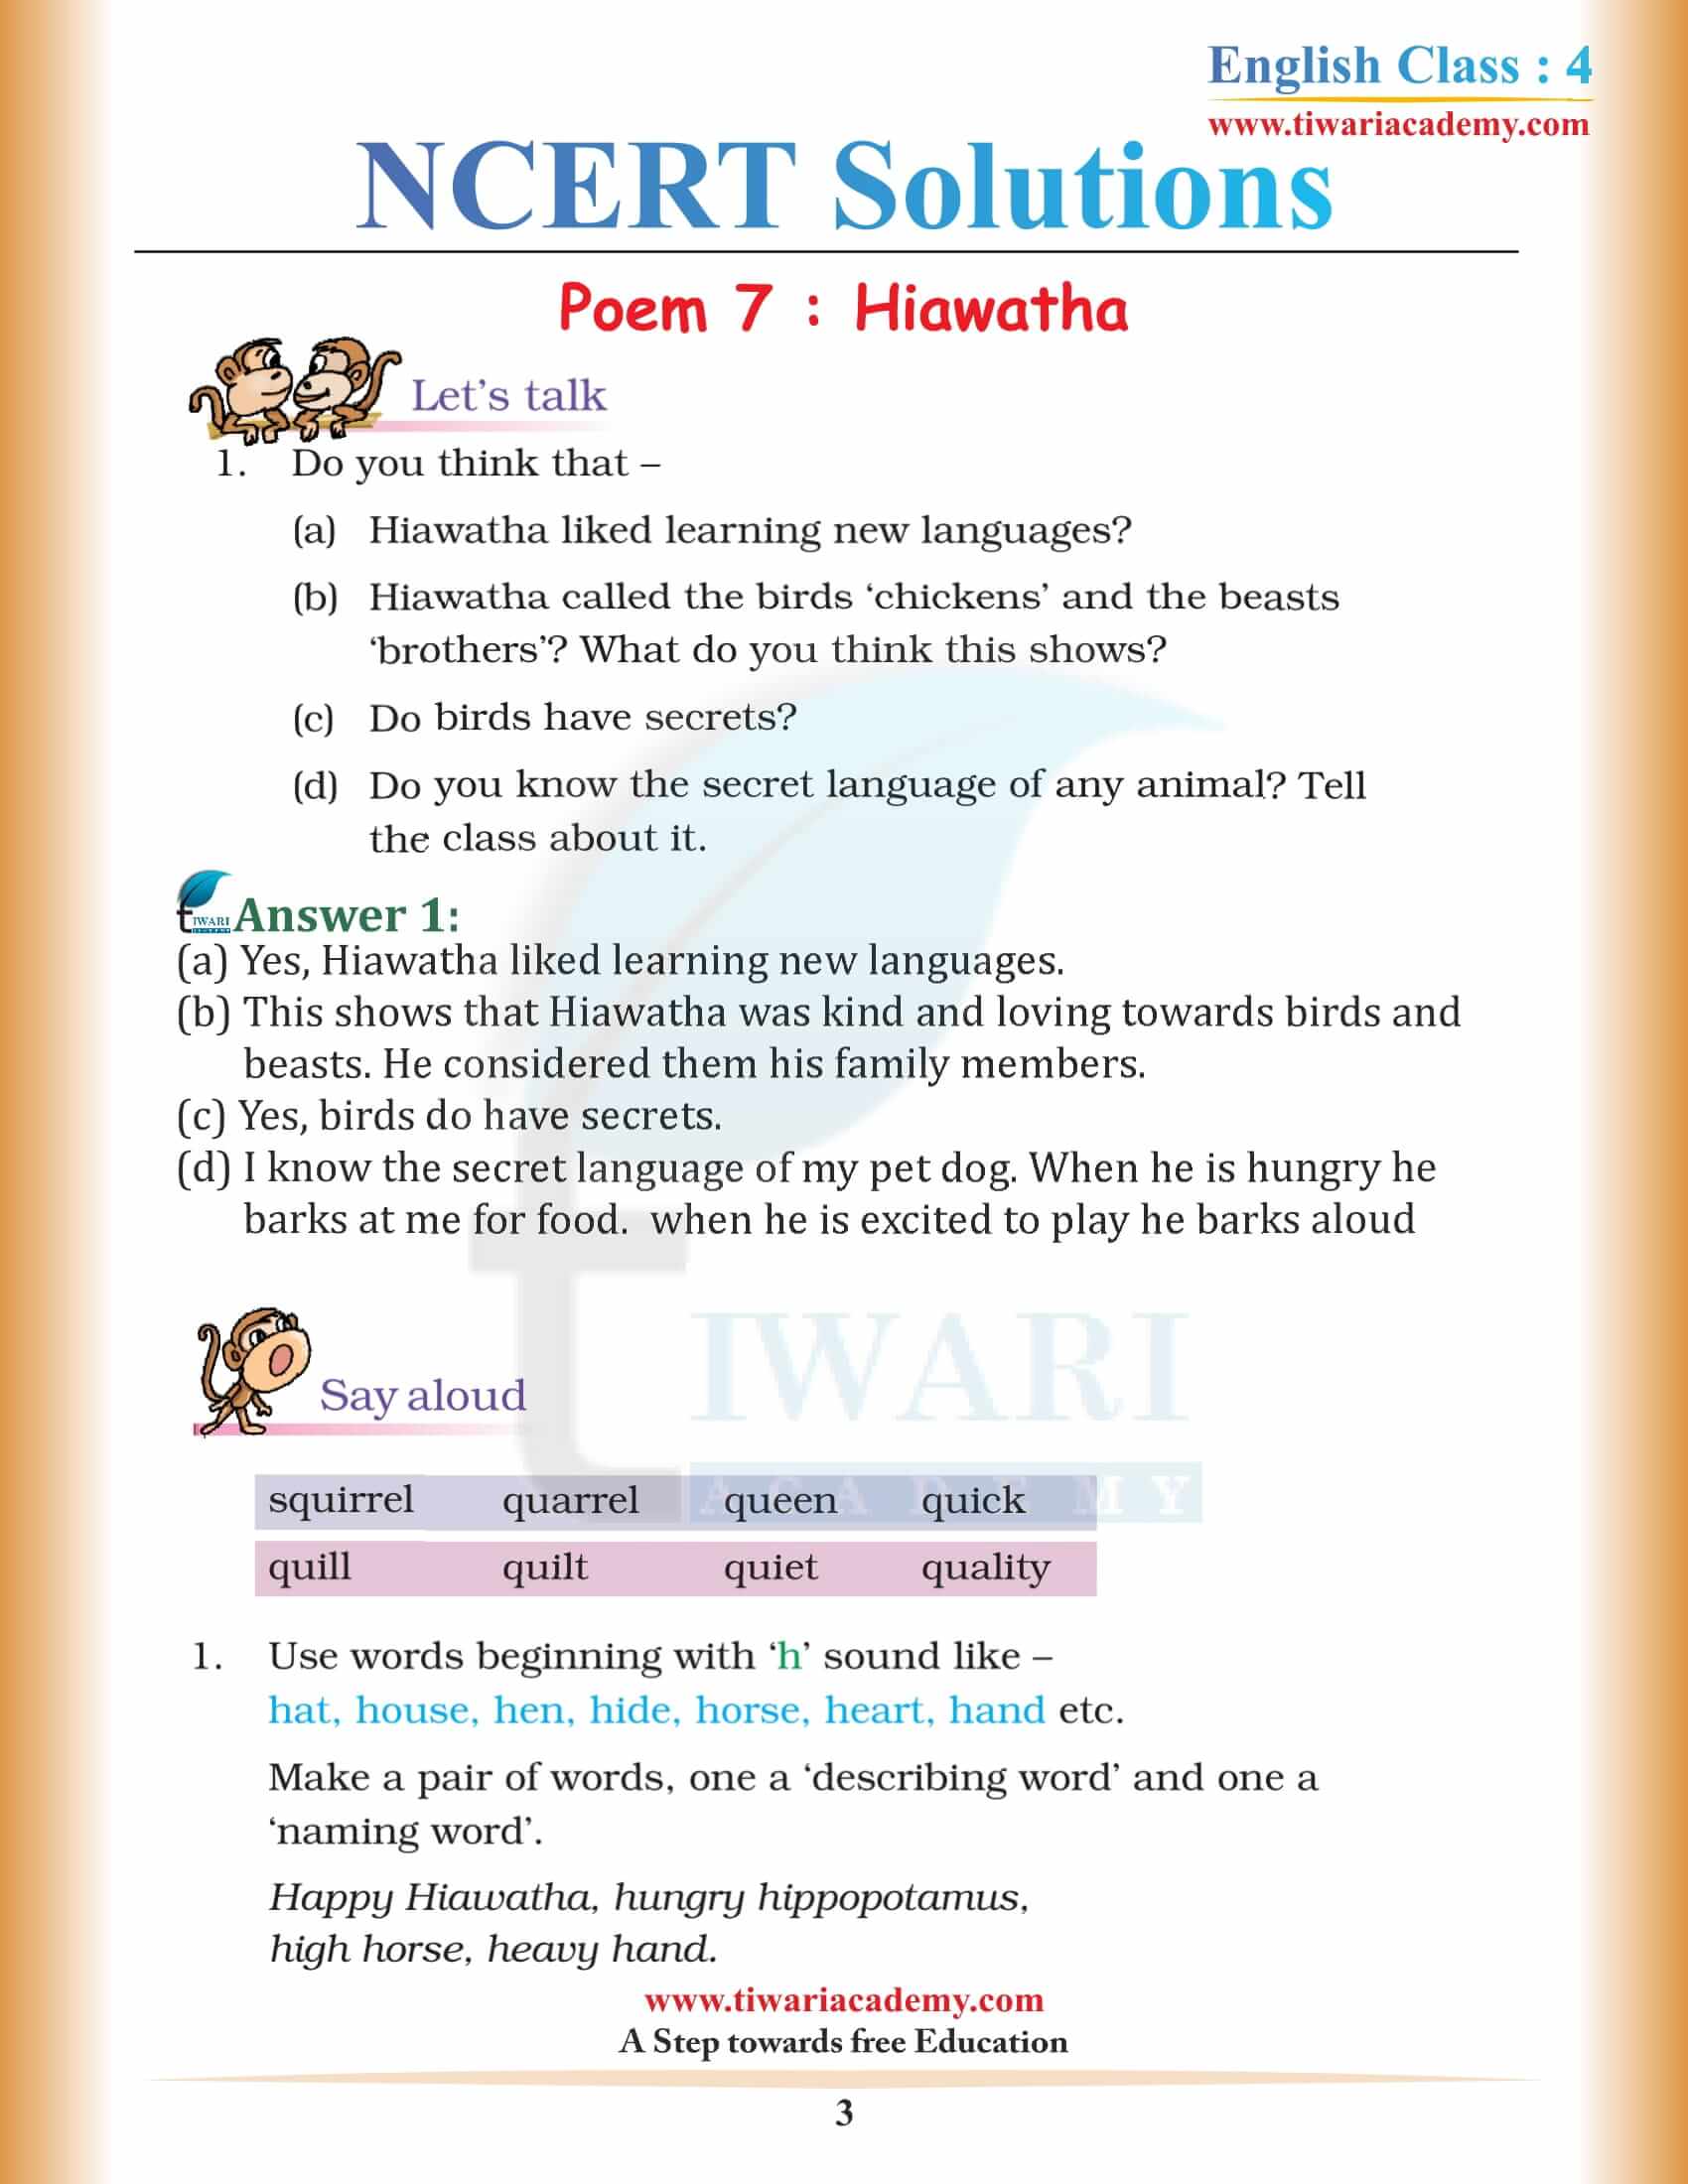 NCERT Solutions for Class 4 English Unit 7